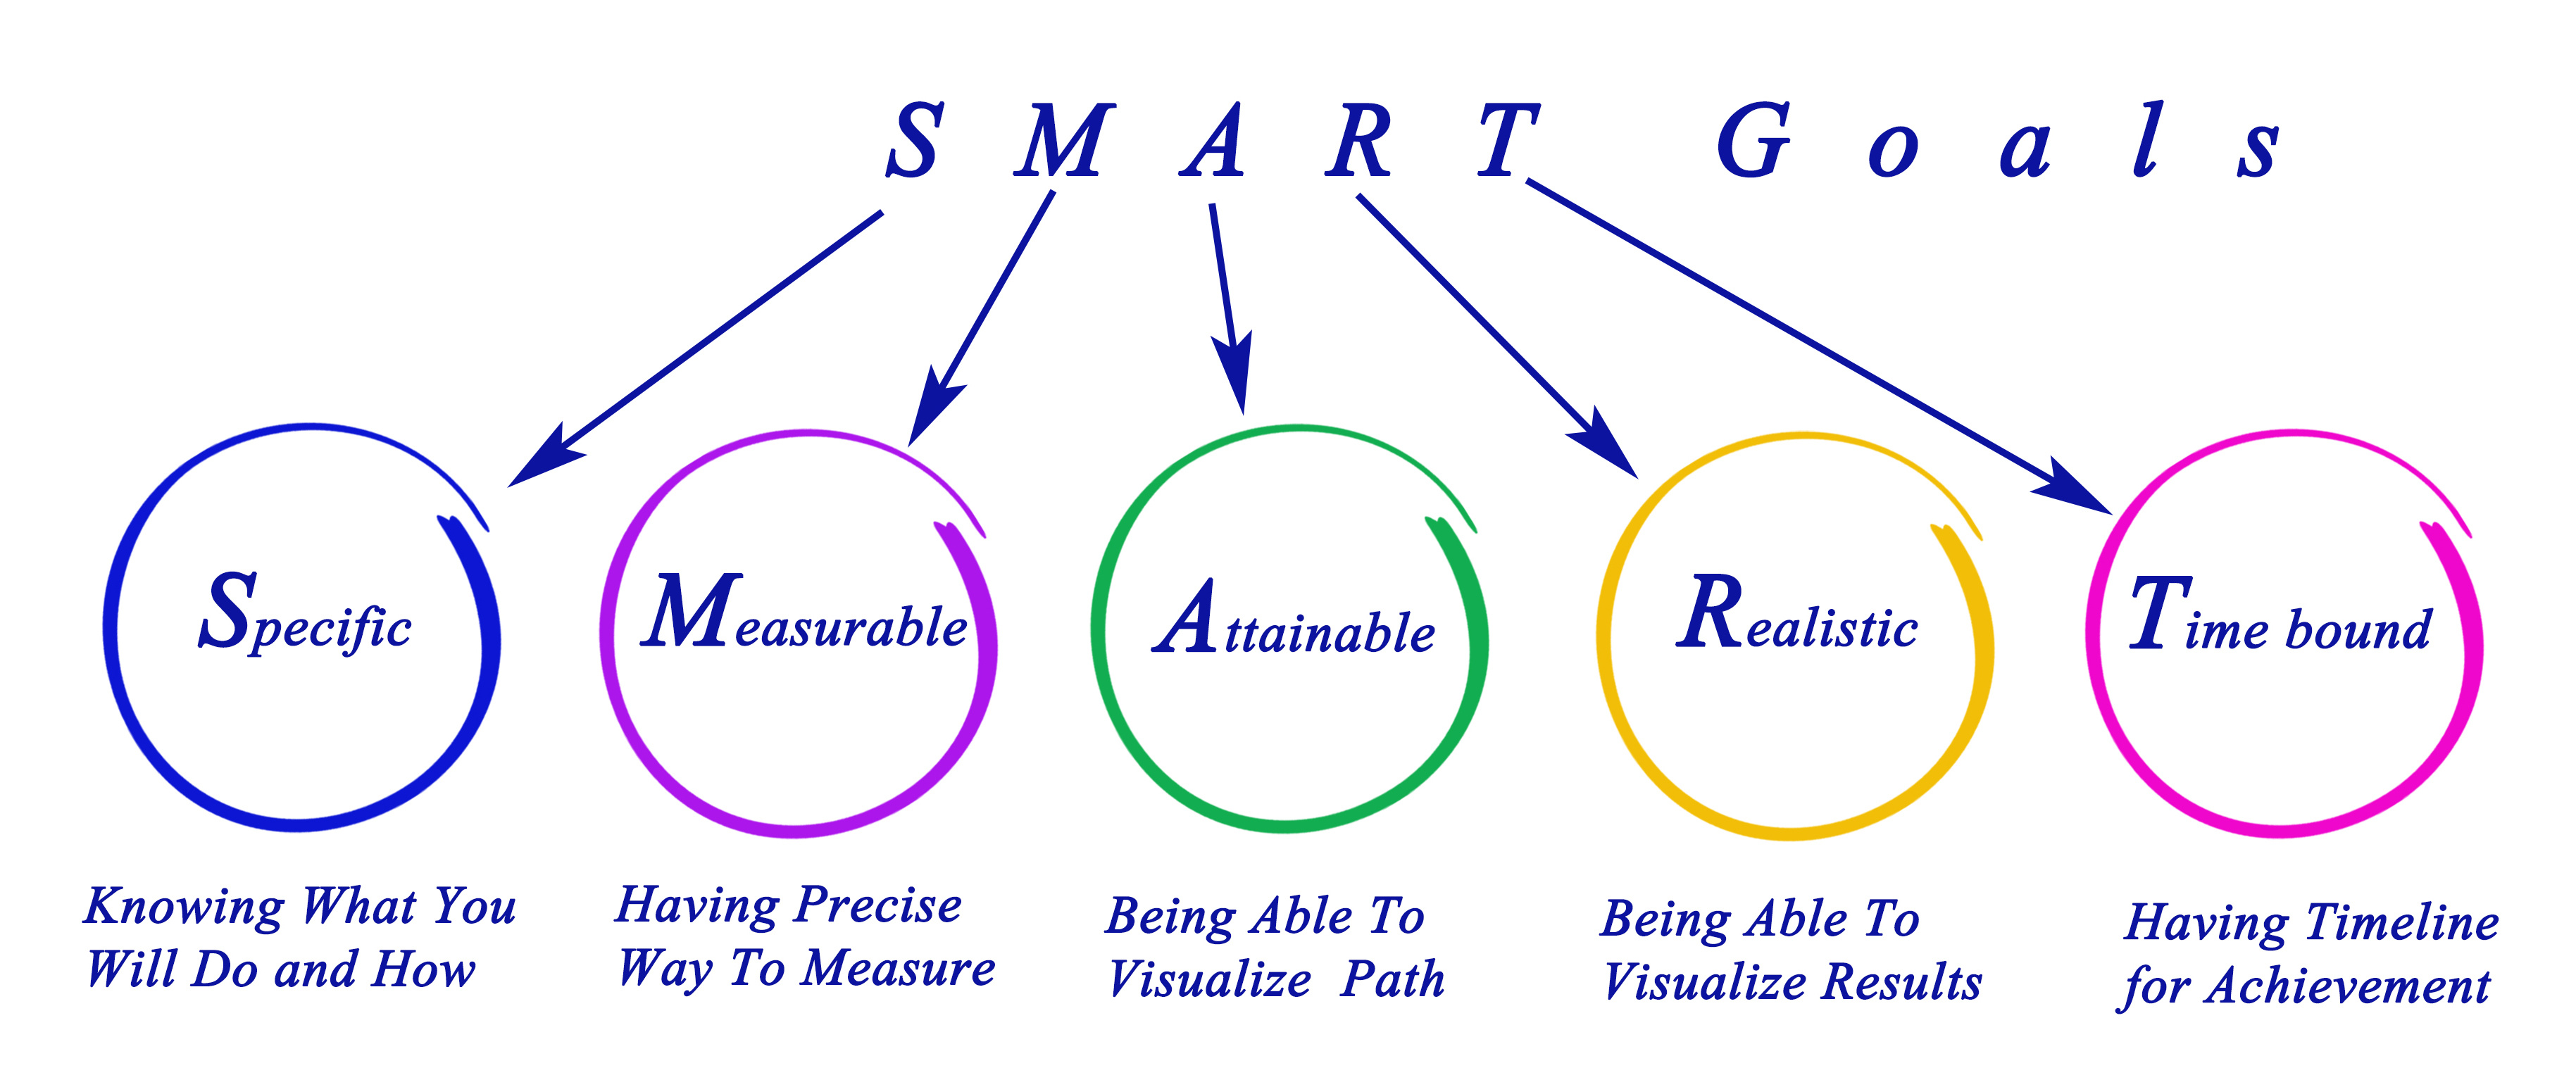 SMART Goals Meaning